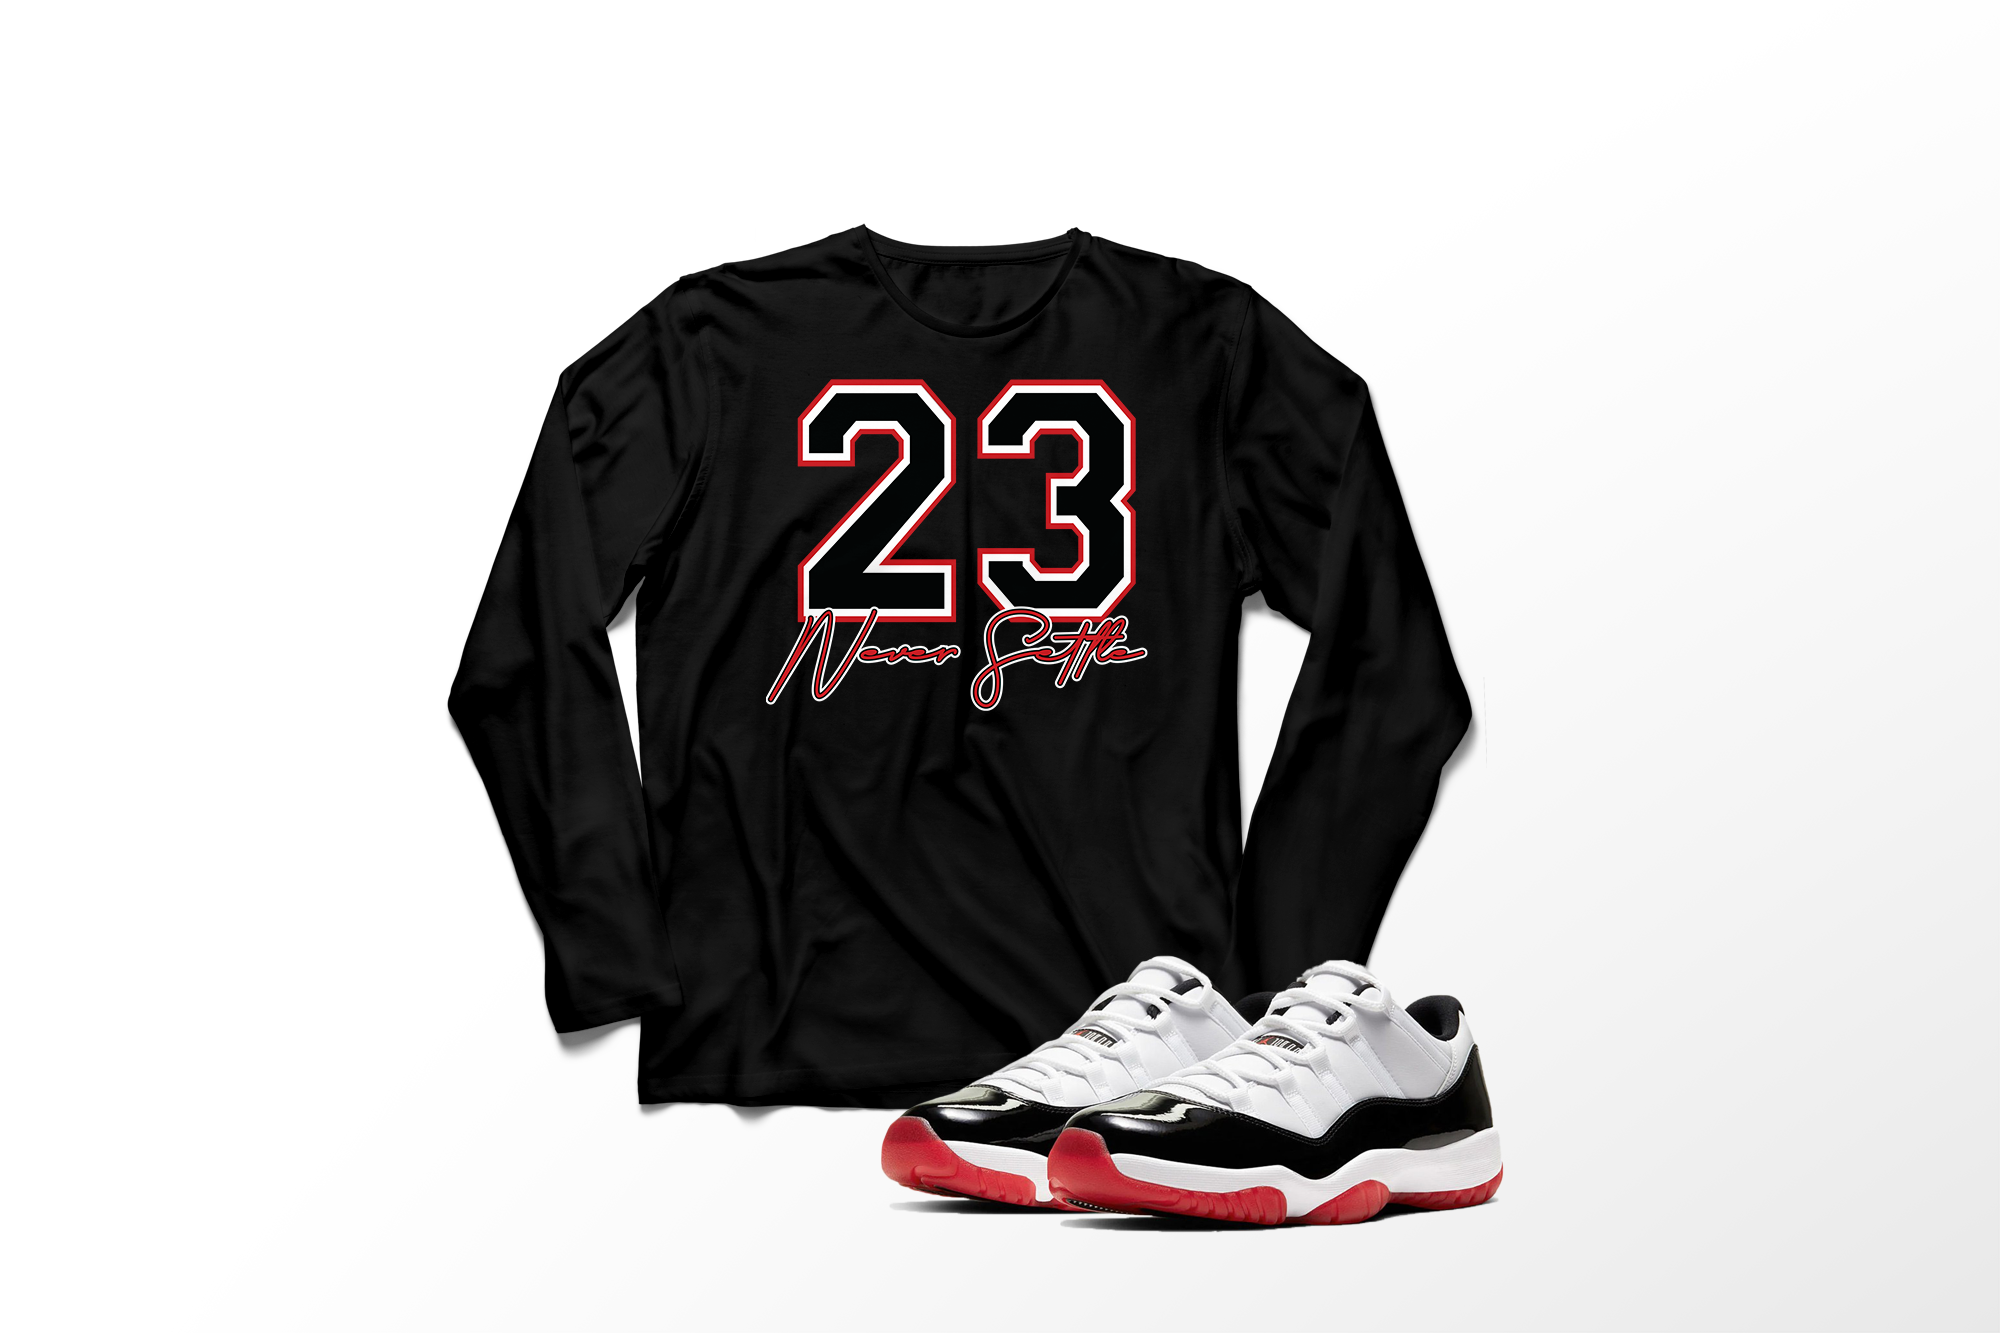 'Never Settle' in Concord Bred CW Men's Comfort Long Sleeve